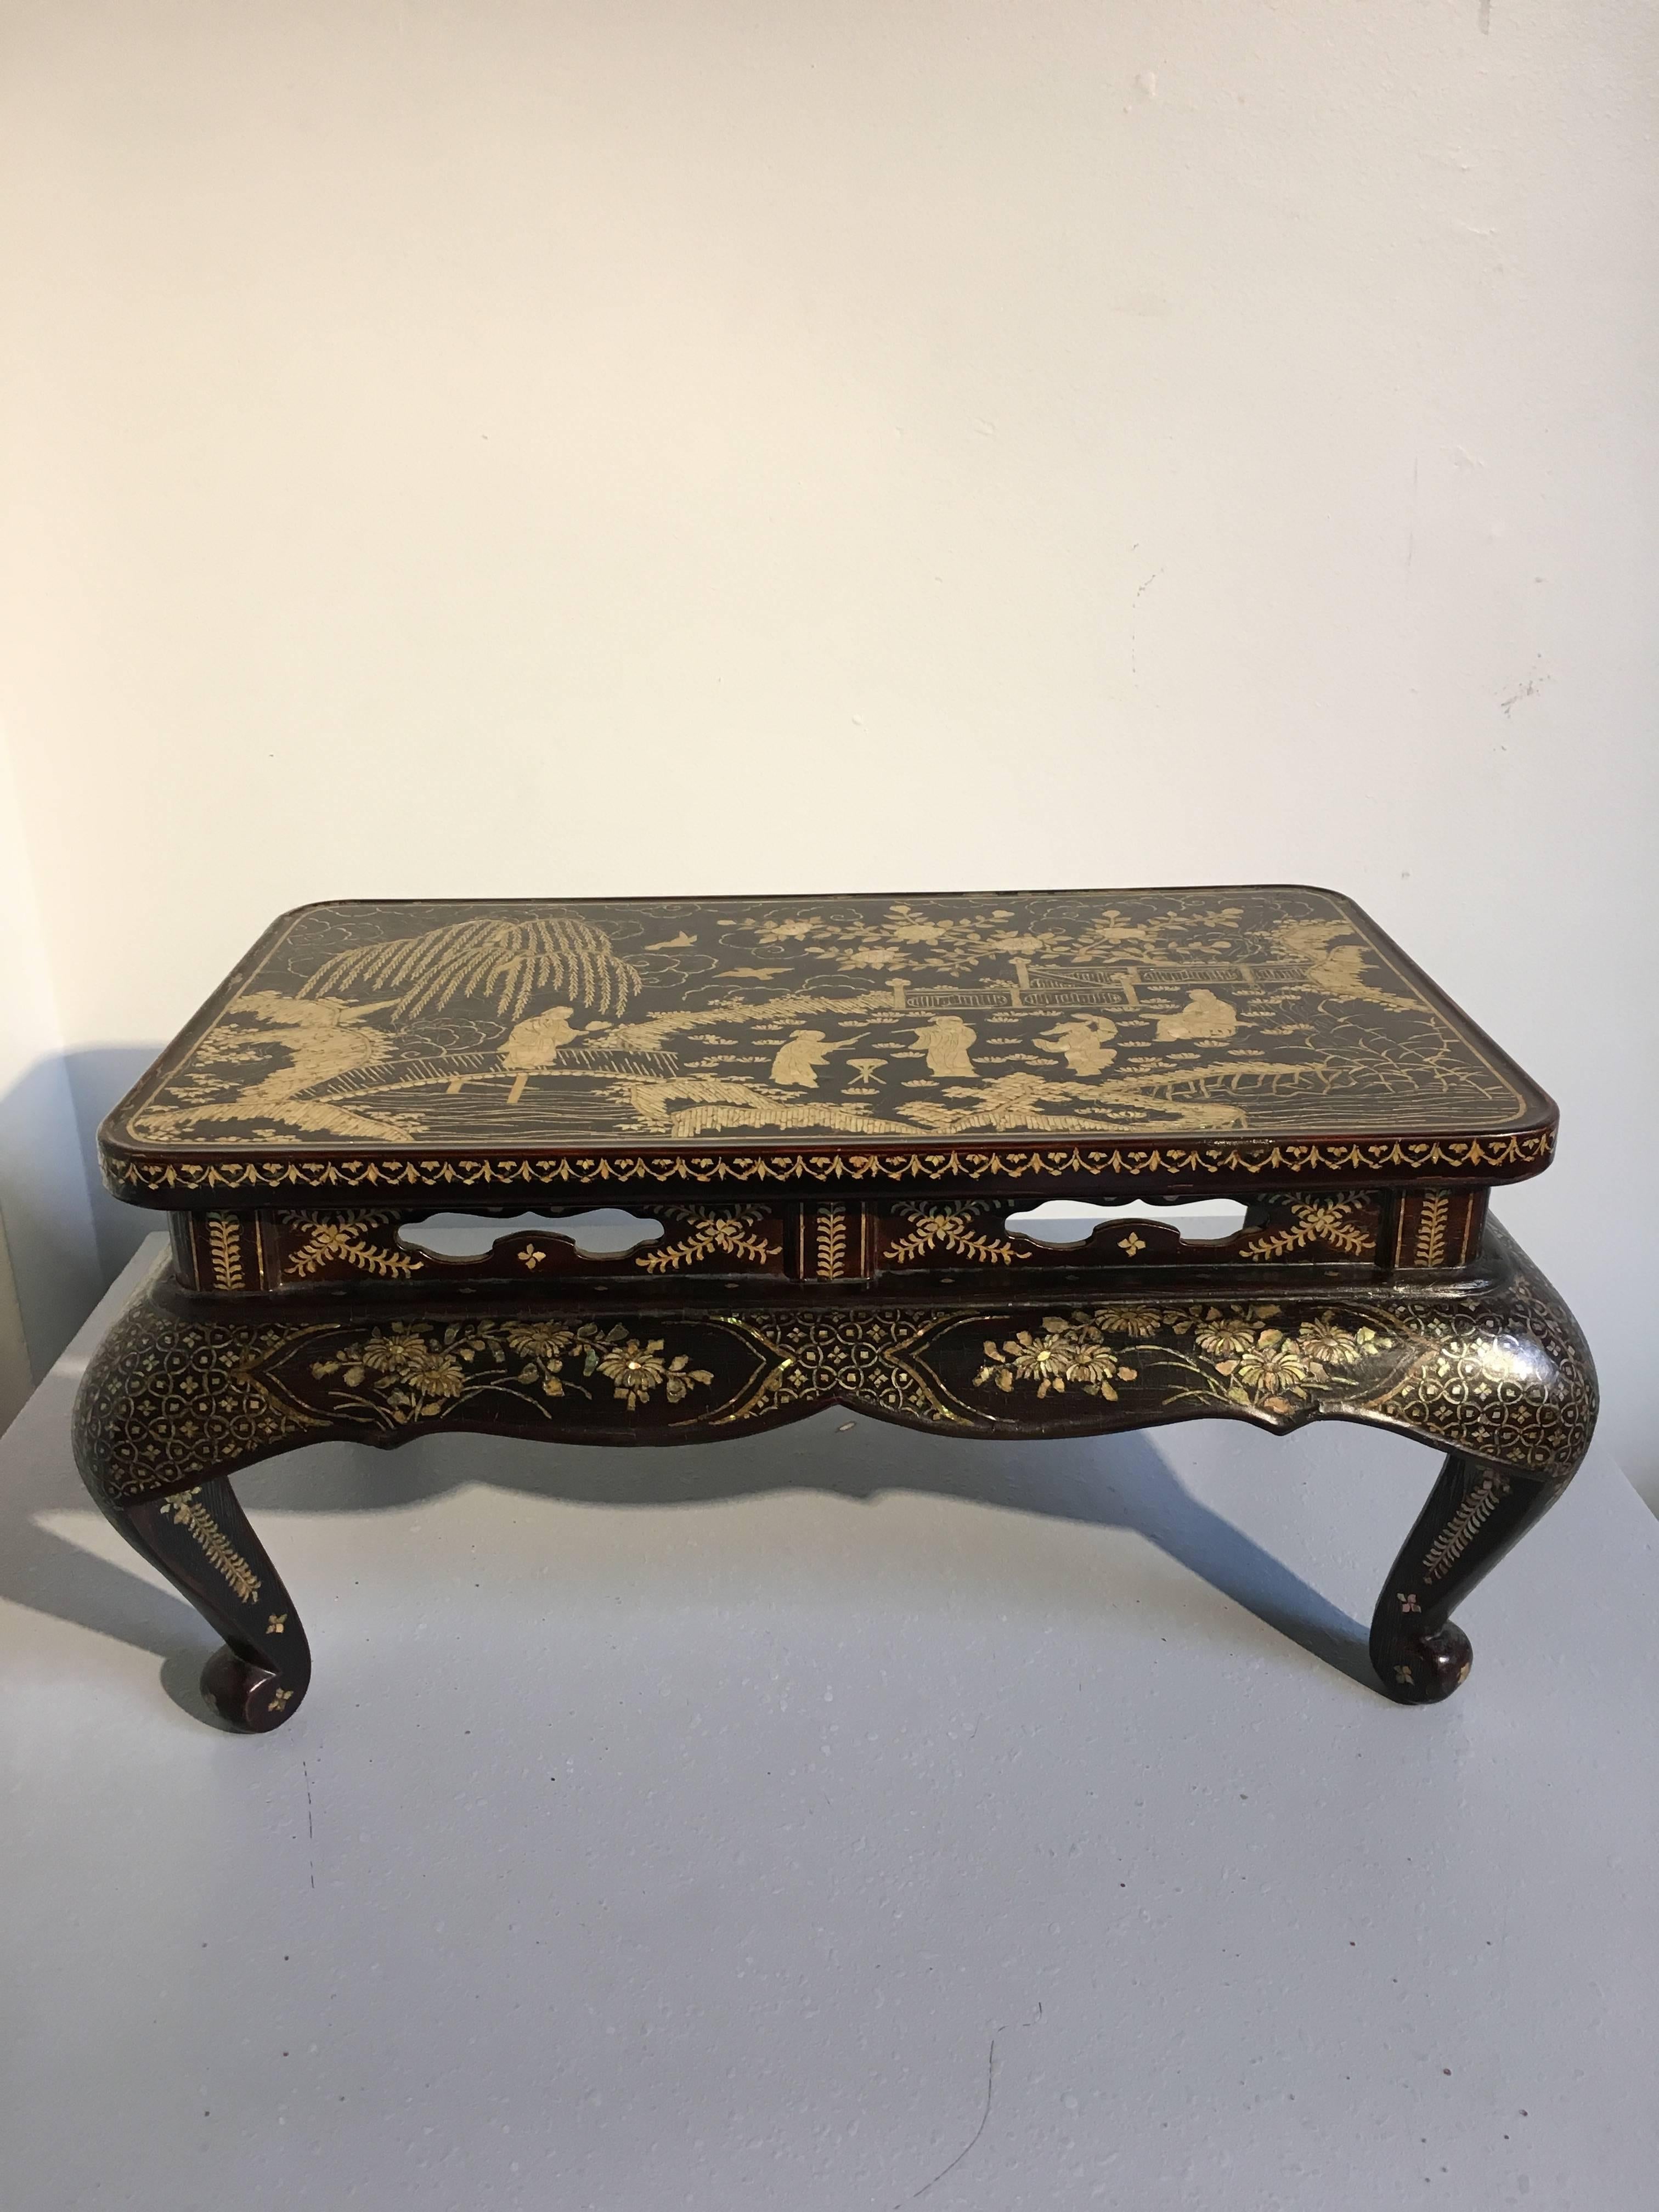 Inlay Qing Dynasty Chinese Lacquer and Mother-of-Pearl Small Table, 18th-19th Century